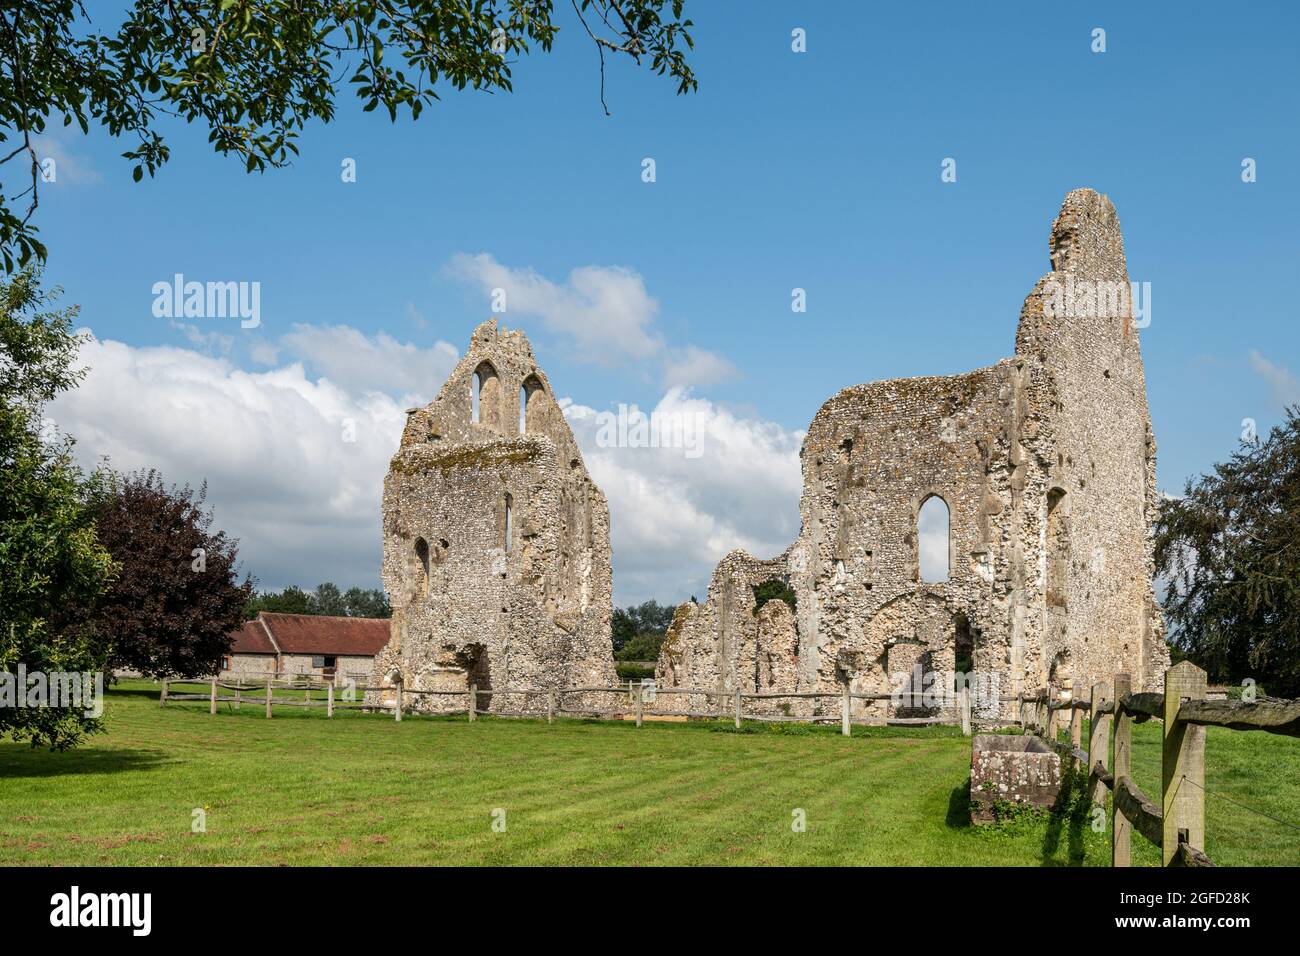 Boxgrove Priory, ruins of the benedictine monastery lodging house, a historic landmark in the West Sussex village of Boxgrove, England, UK Stock Photo